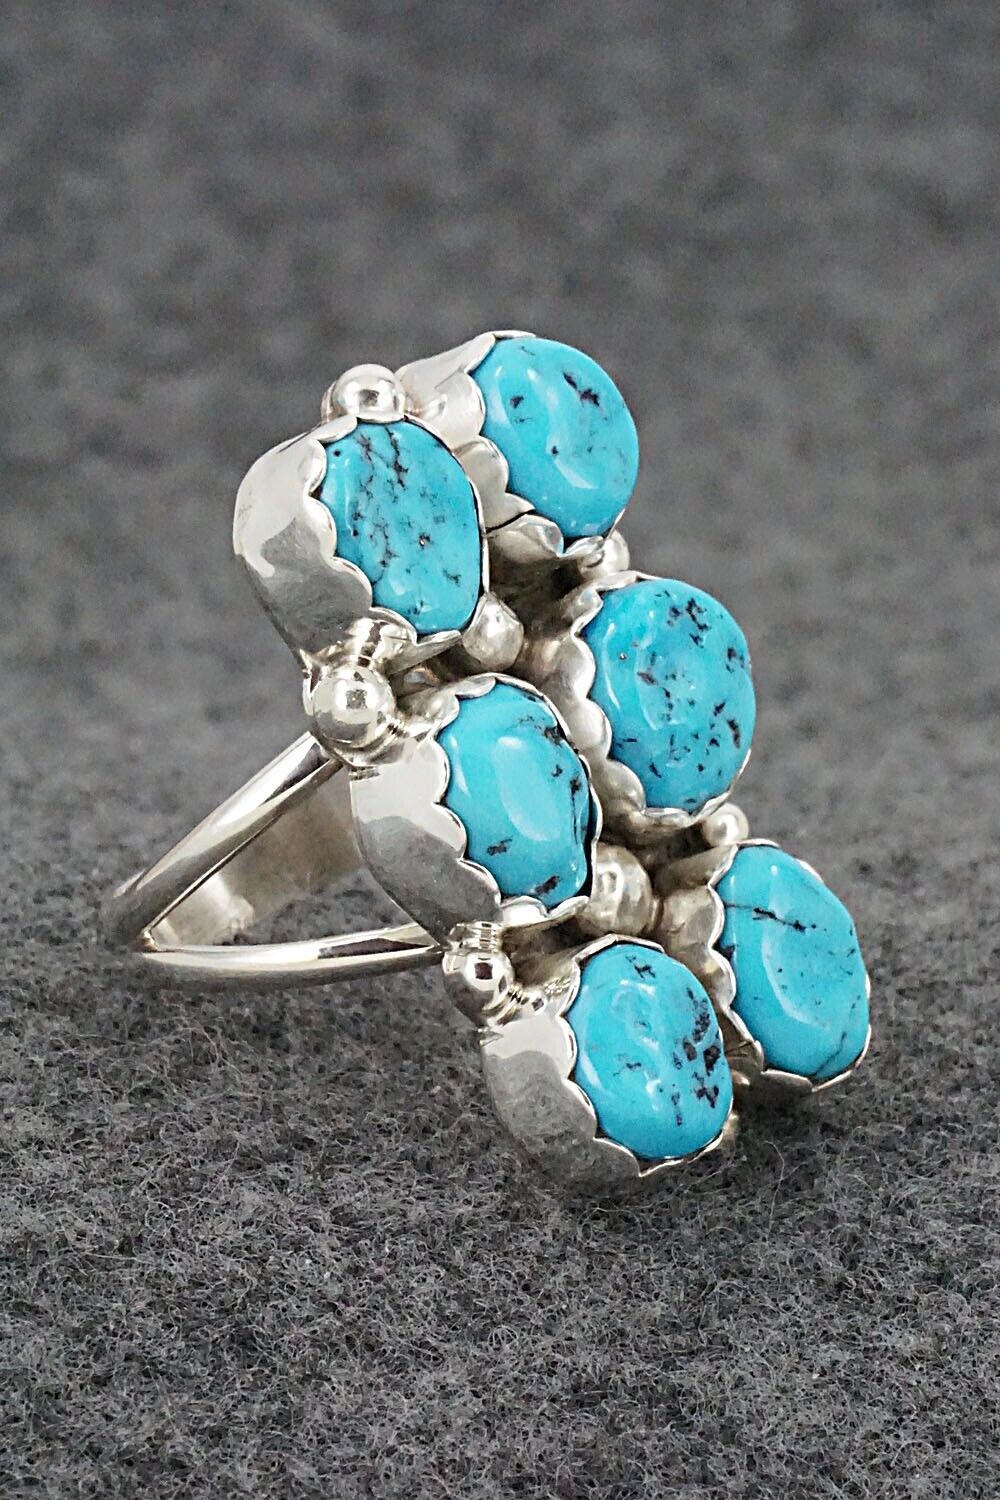 Turquoise & Sterling Silver Ring - Pearlene Spencer - Size 8.5